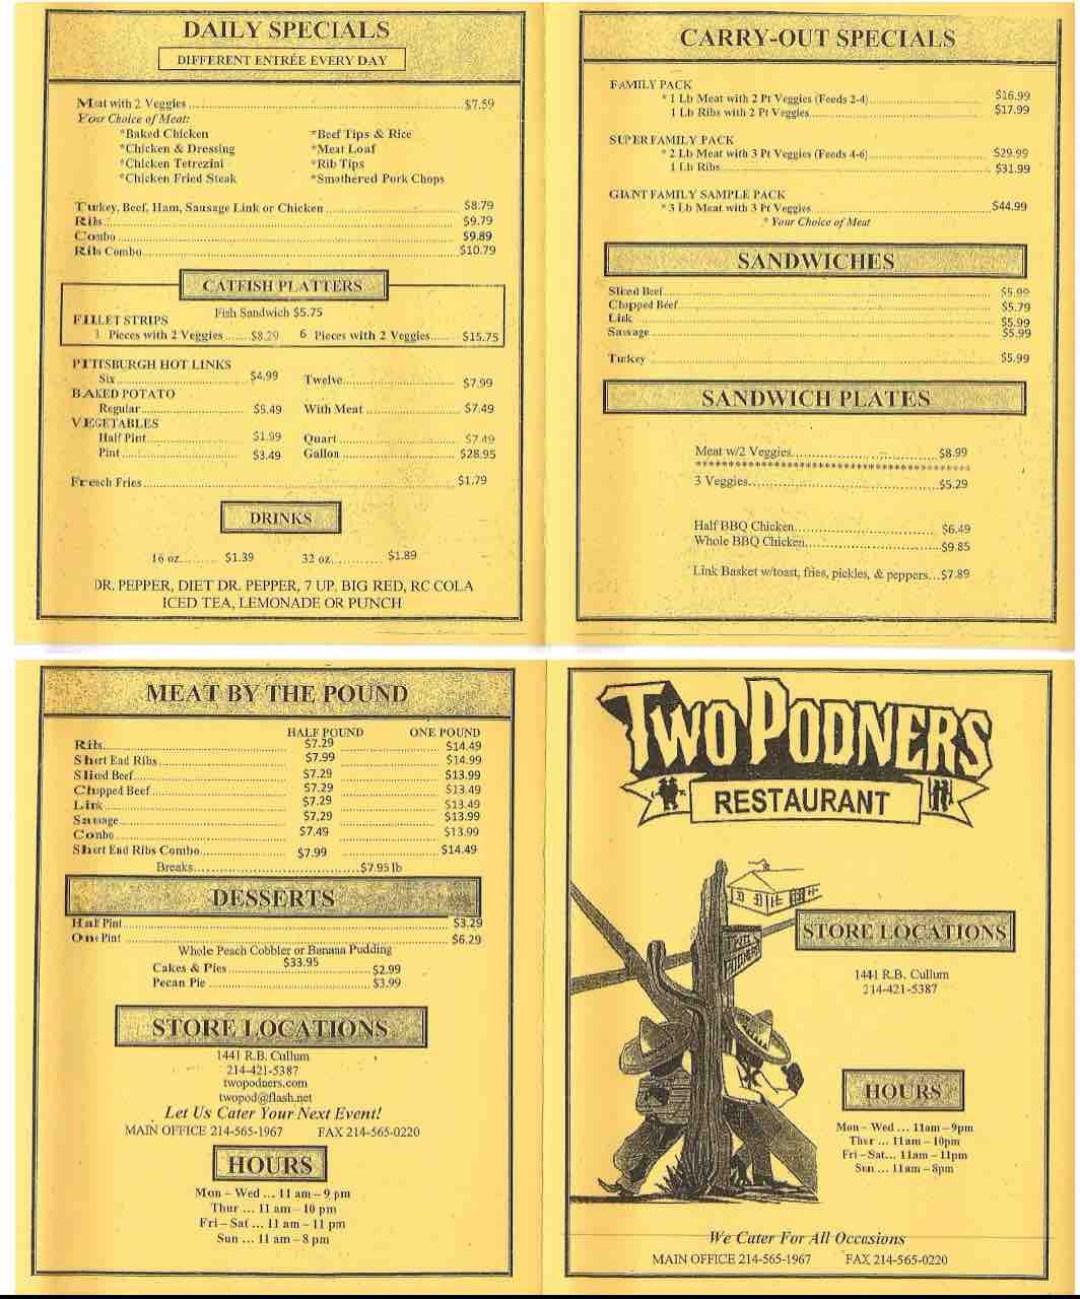 Picture of: Online Menu of Two Podners Bar-B-Q & Seafood Restaurant, Dallas